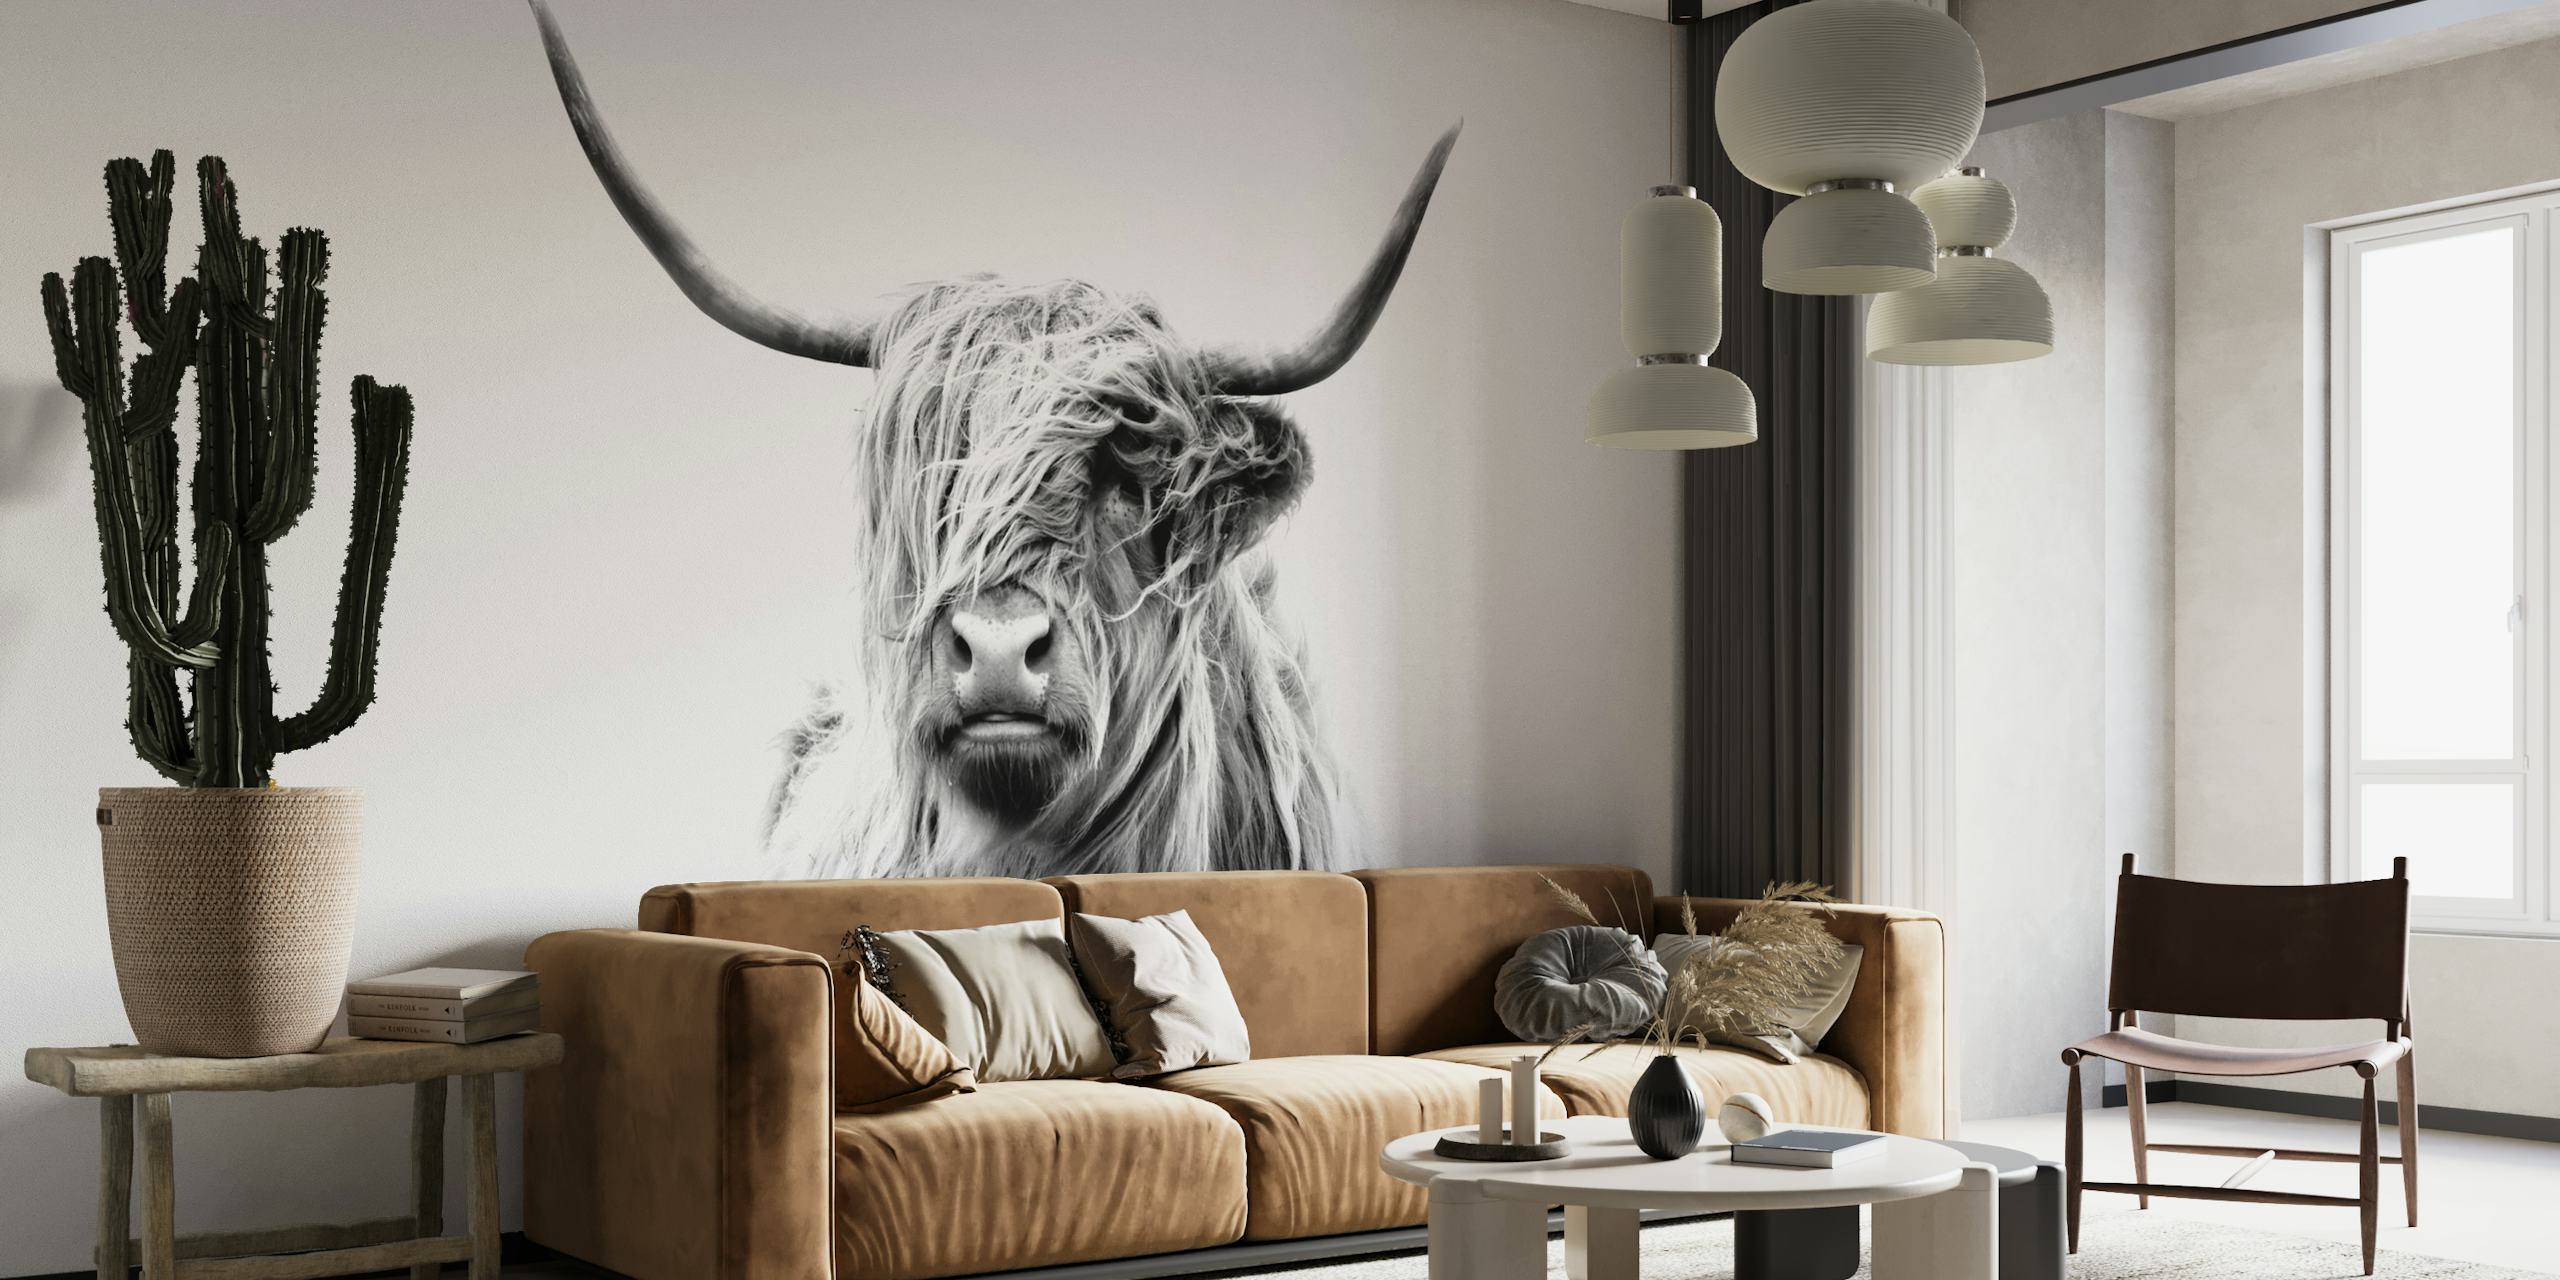 Highland Cow wall mural emanating rustic charm